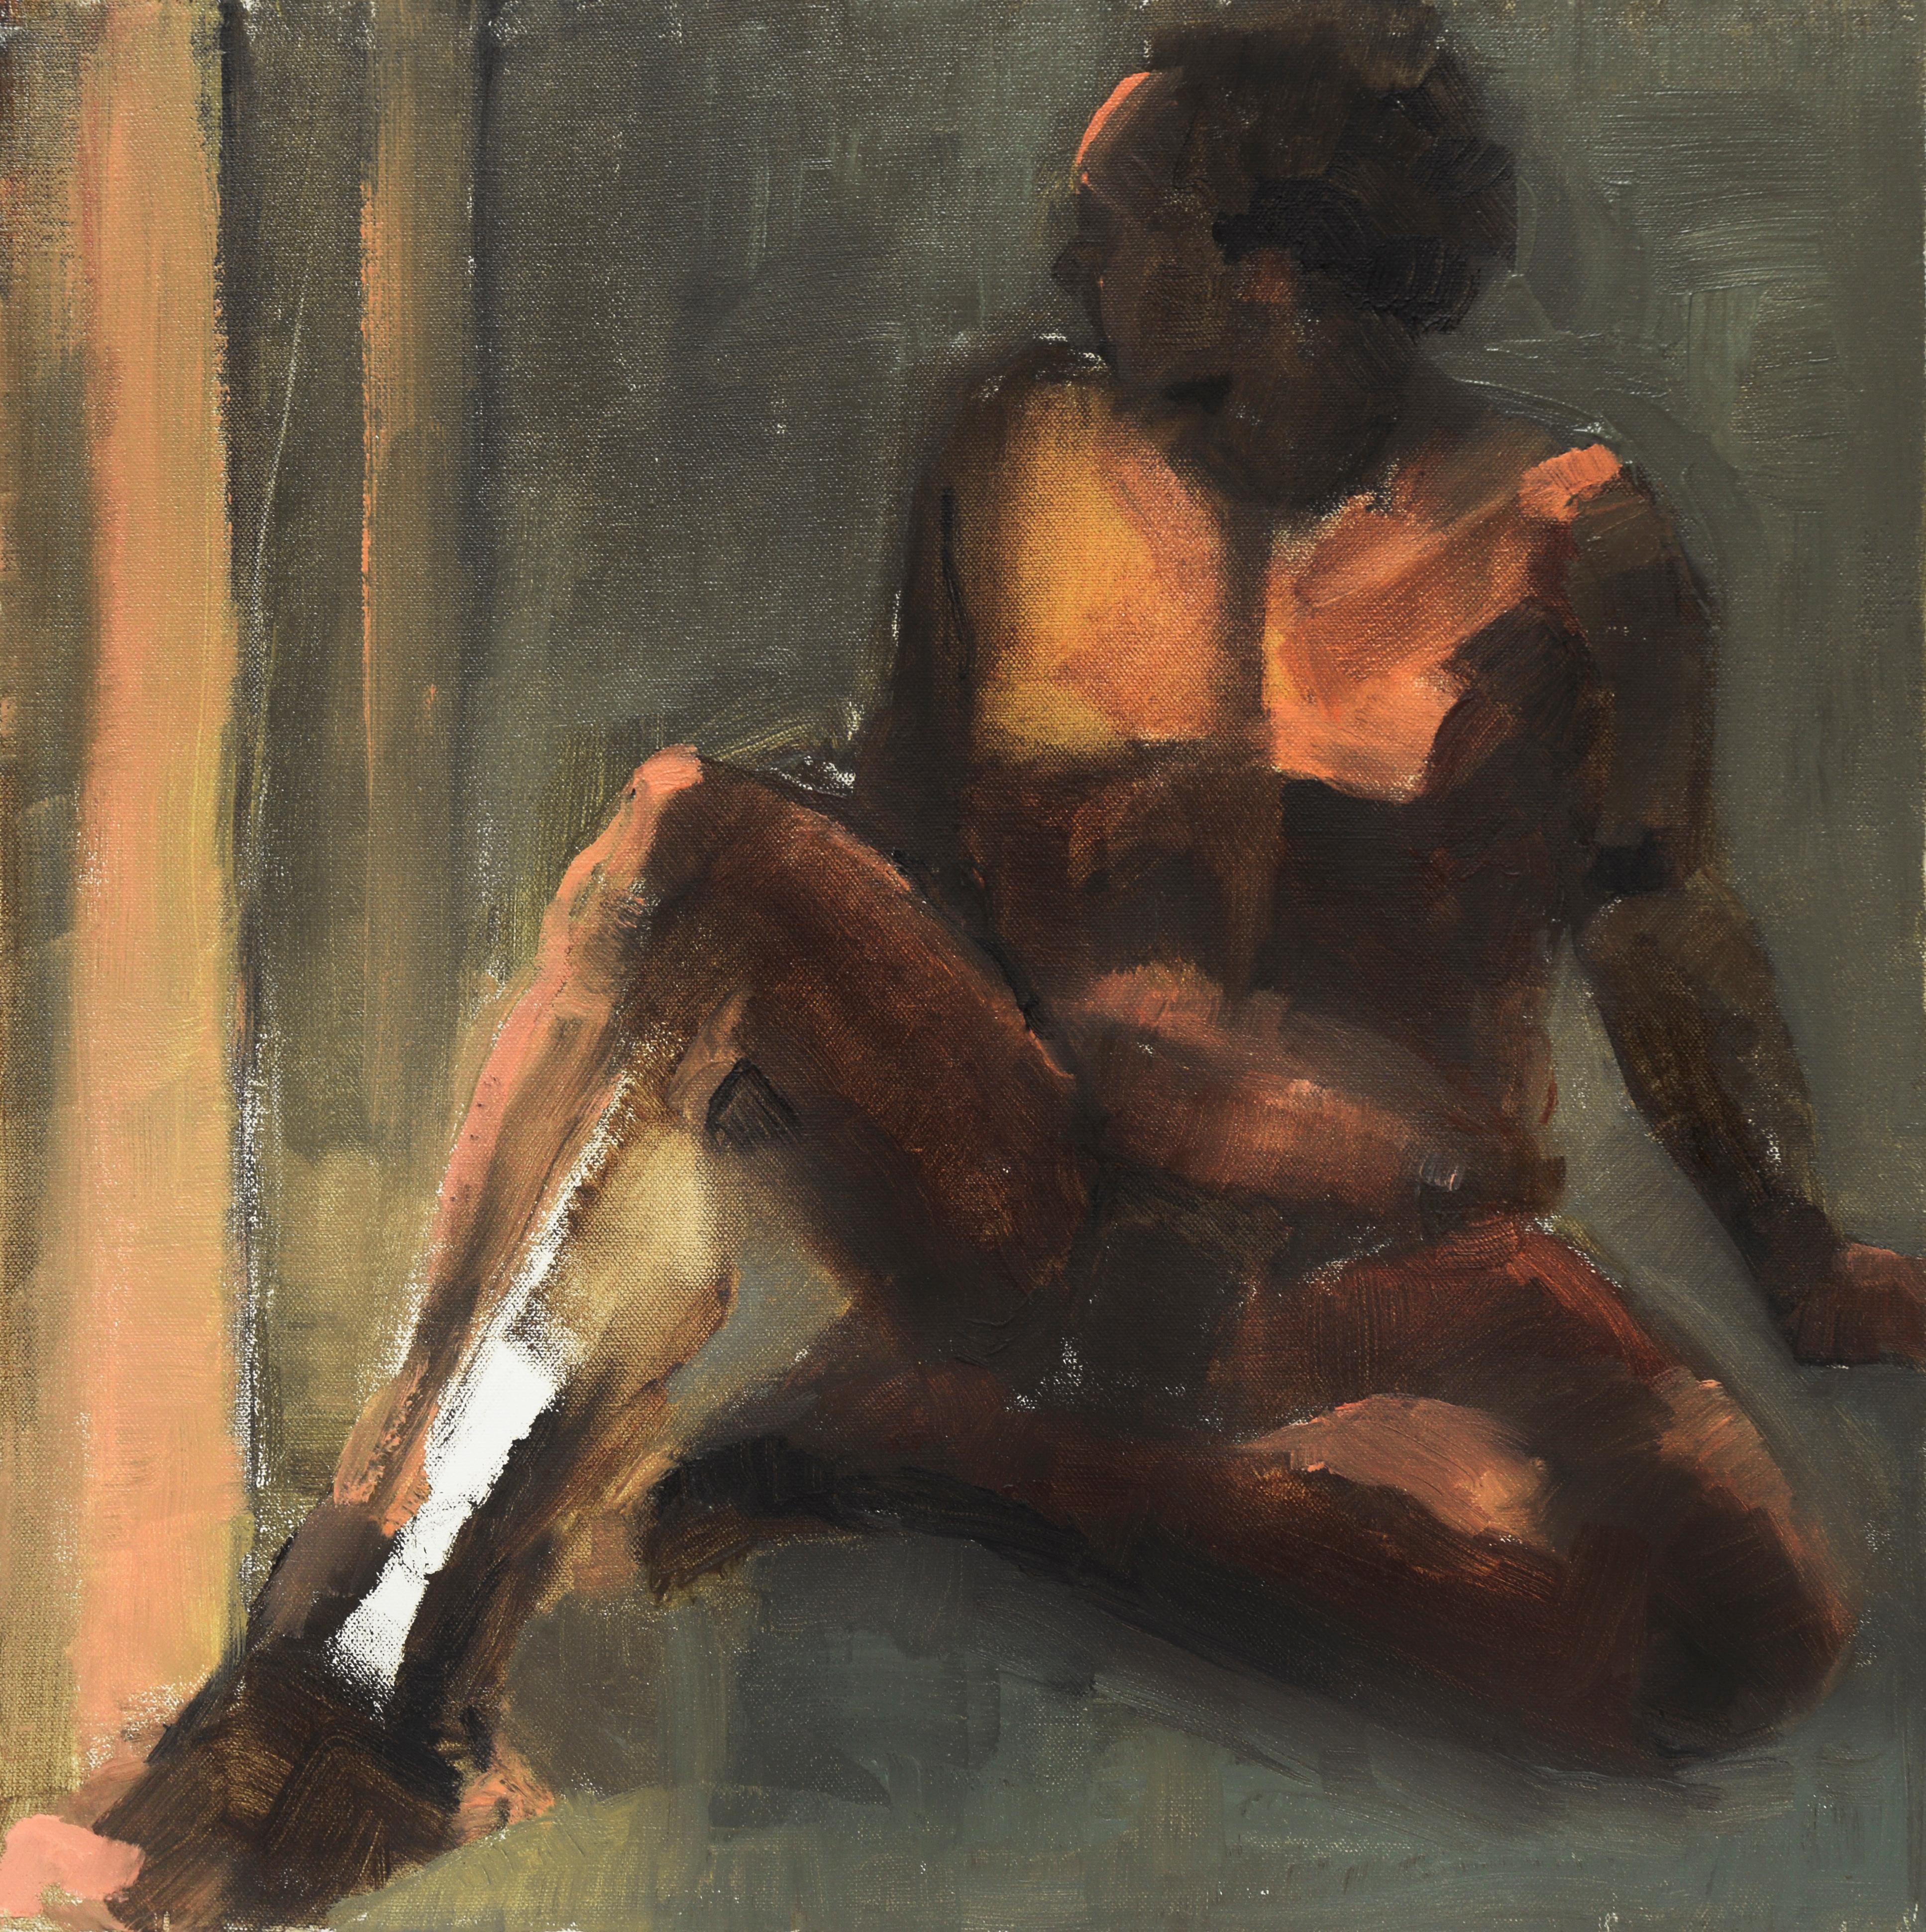 Sumrall Figurative Painting - Bay Area Figurative Nude Study - Oil On Canvas